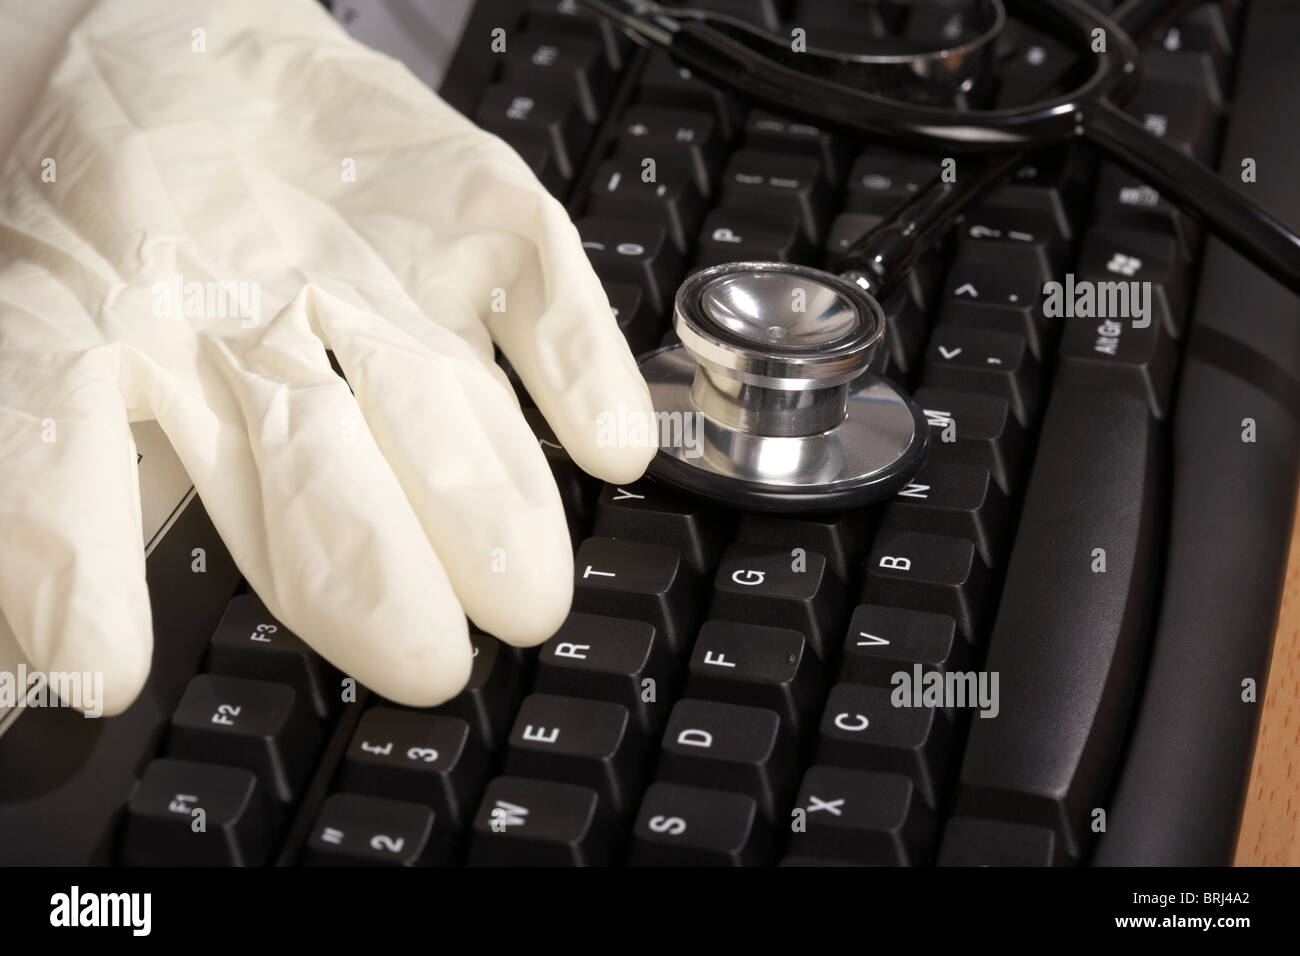 stethoscope and rubber glove on a computer keyboard Stock Photo